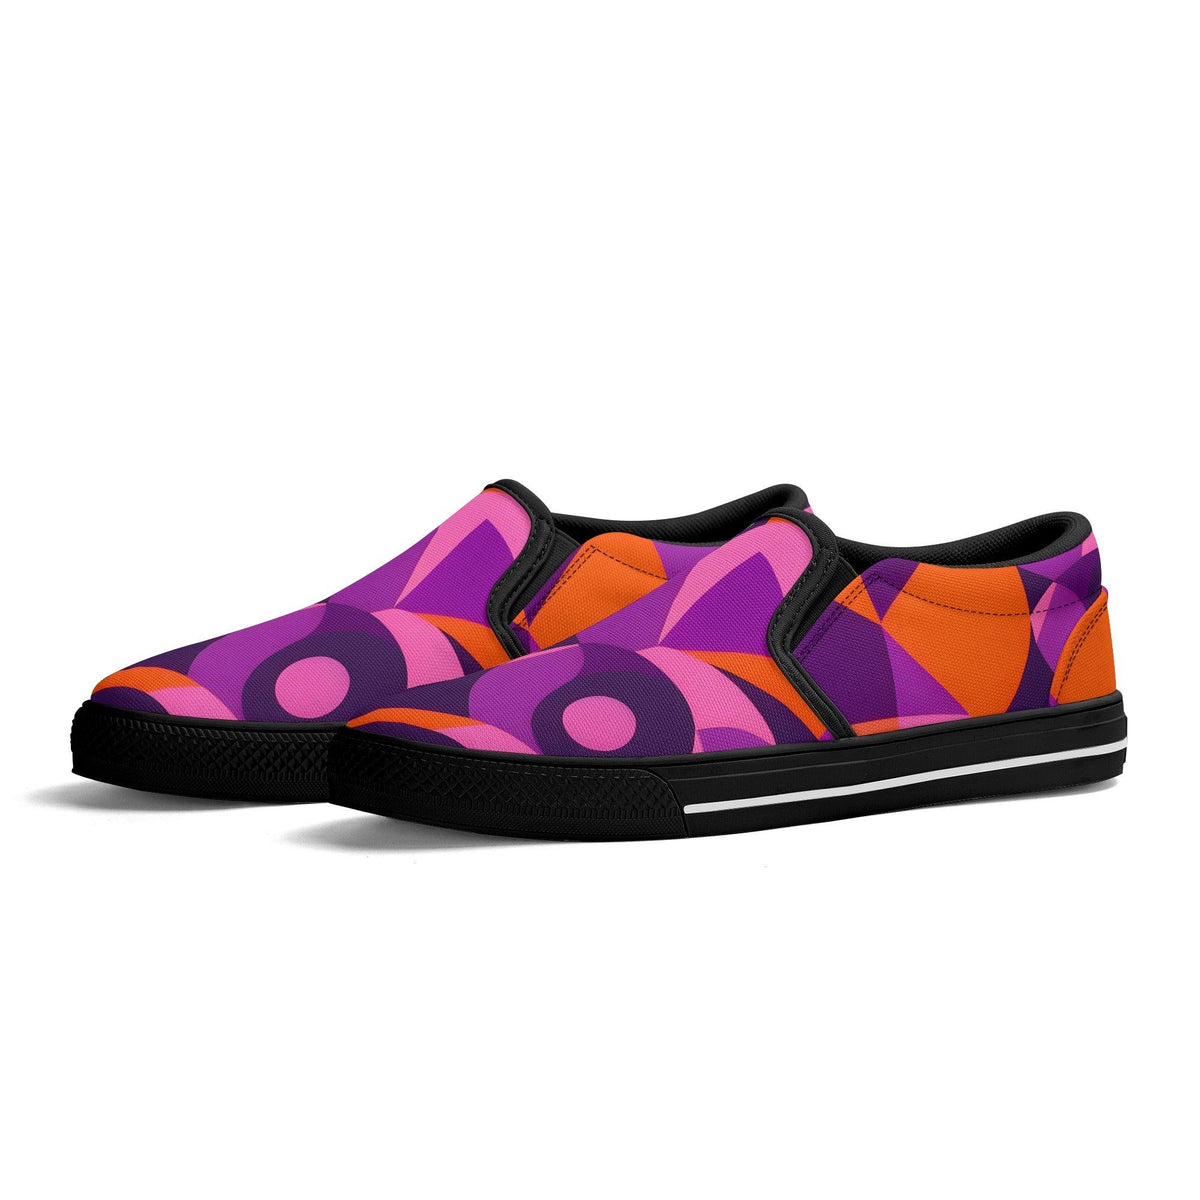 Ailrine Series 239 Canvas Slip On Skater Shoes - Abstract Geometric Violet Pink Orange Multicolor Funky Bold Artistic Retro Mod Women's Black Casual Blissfully Brand Psychedelic 70's pop art